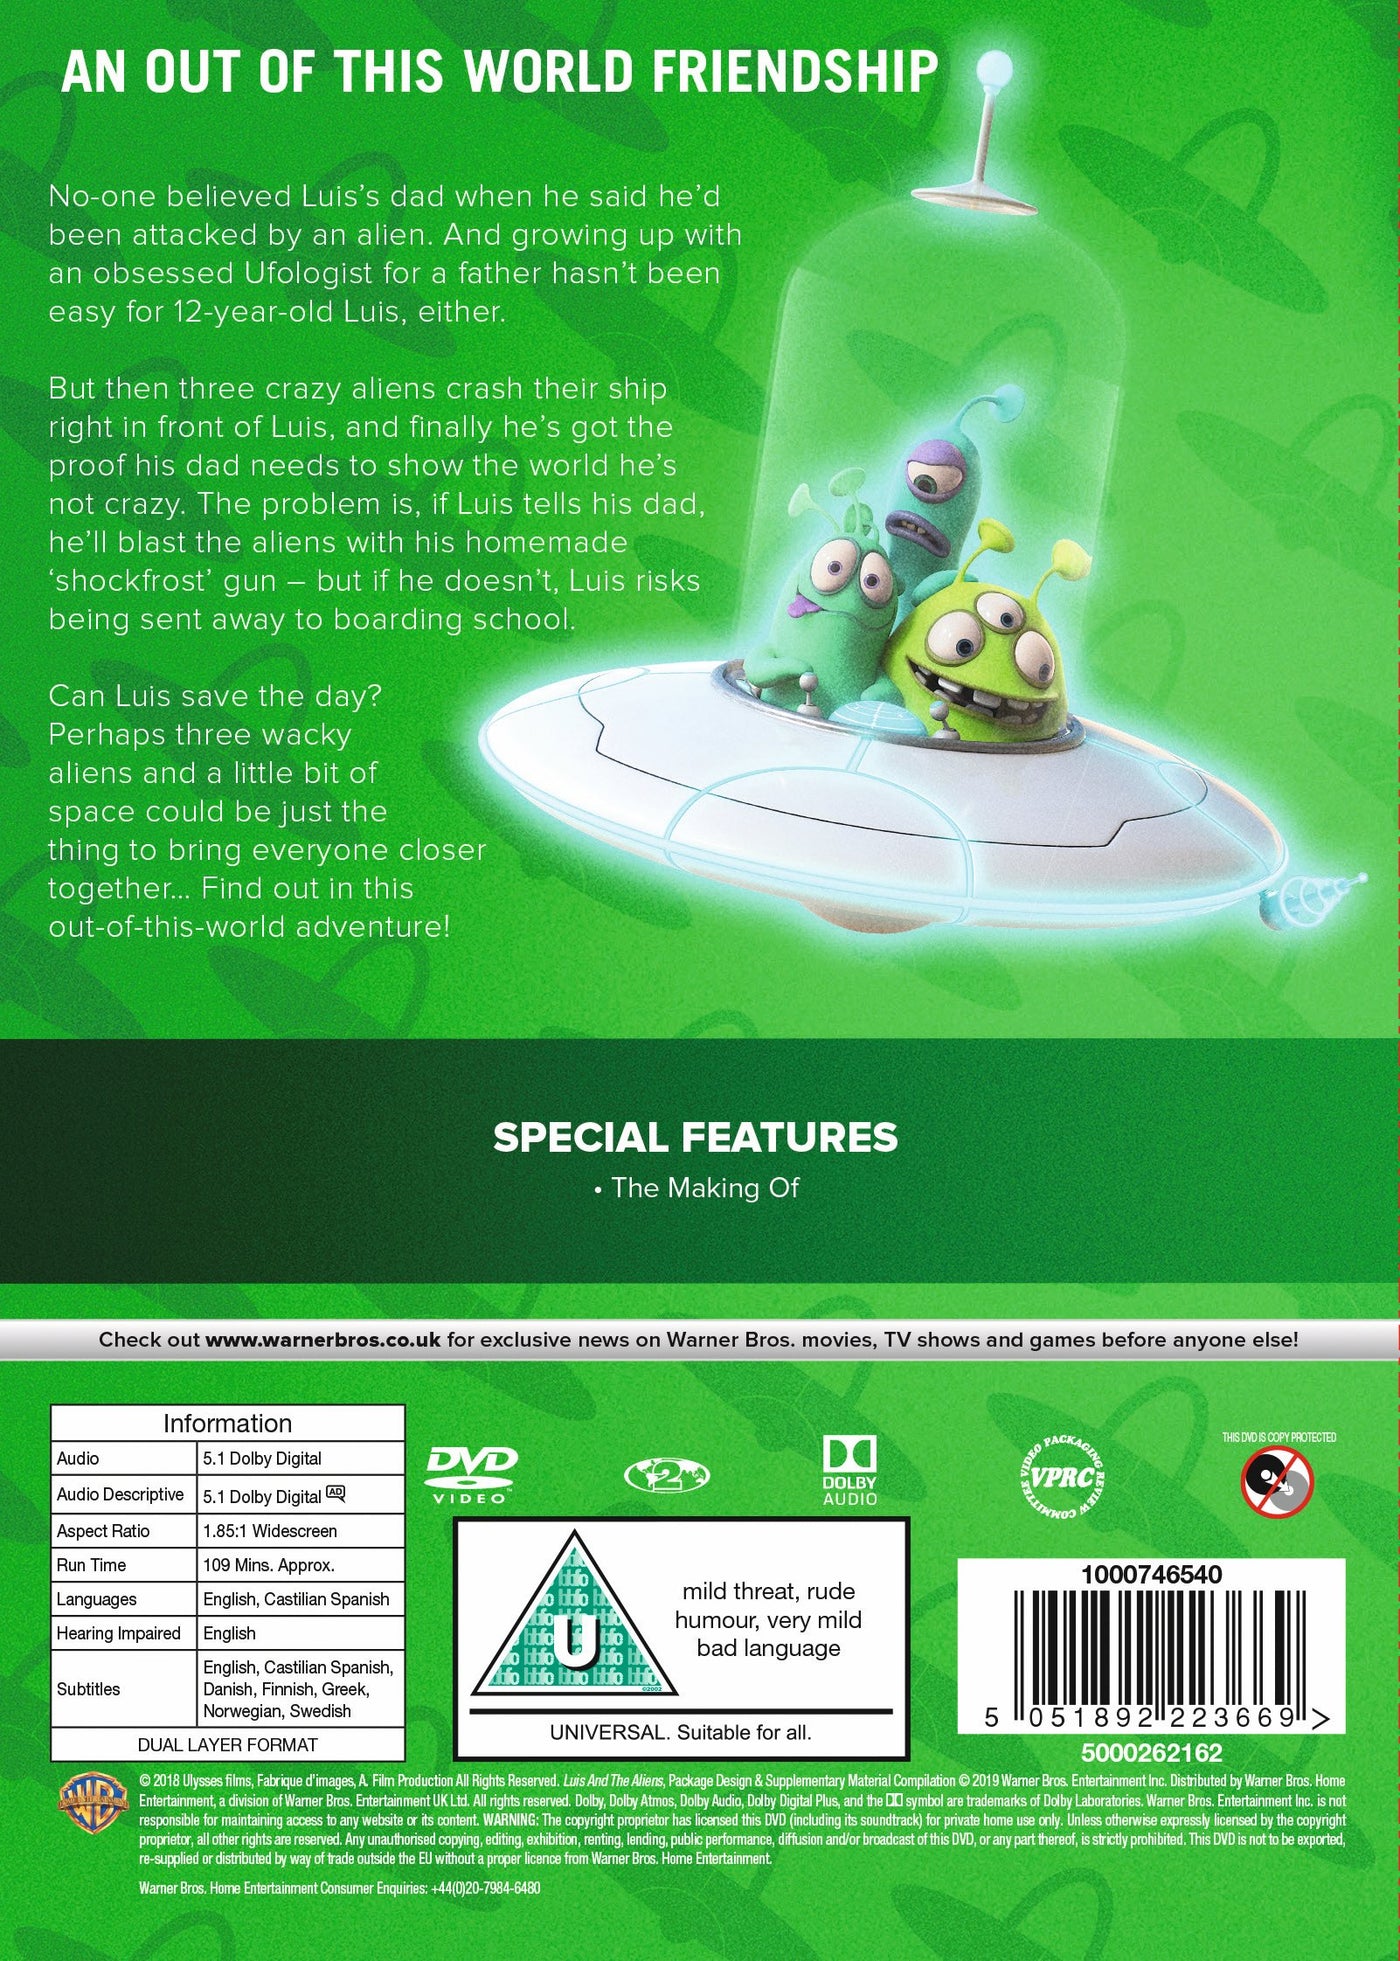 Luis And The Aliens (DVD)